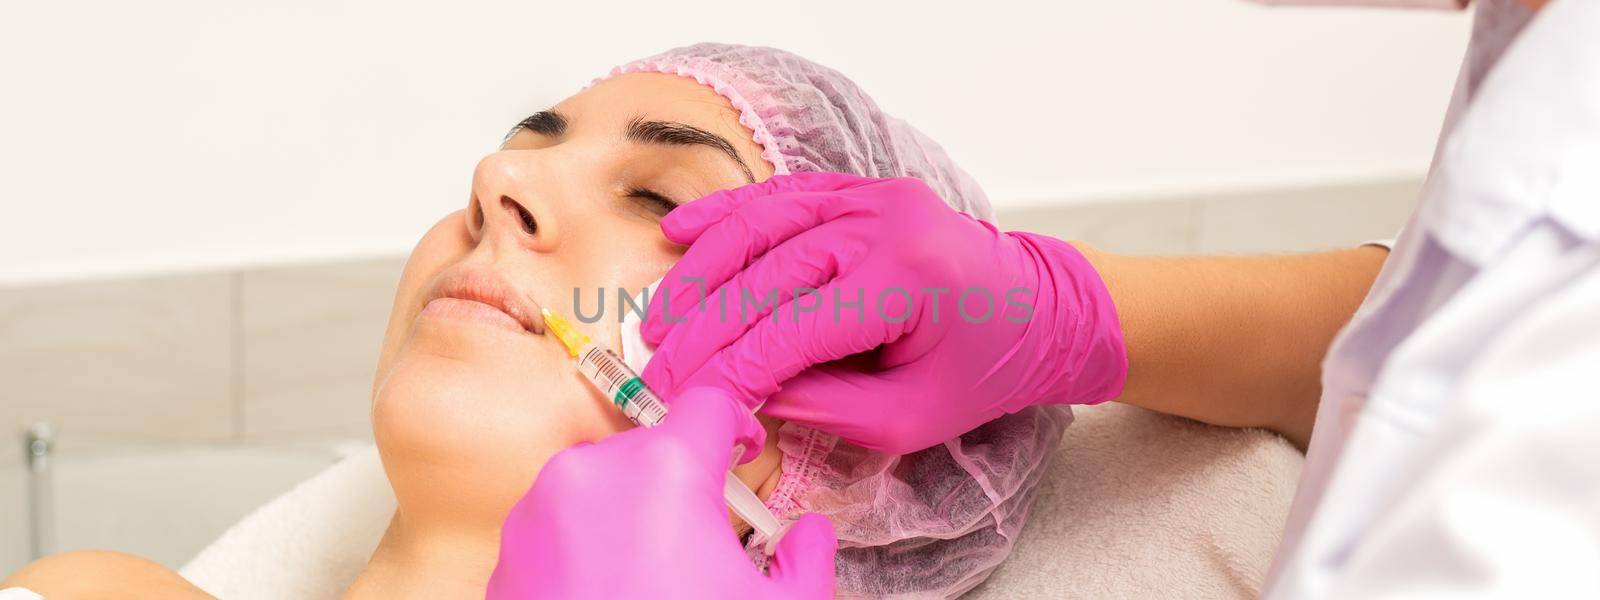 Young caucasian woman getting botox injection with hyaluronic acid in the lips at a beauty clinic. by okskukuruza